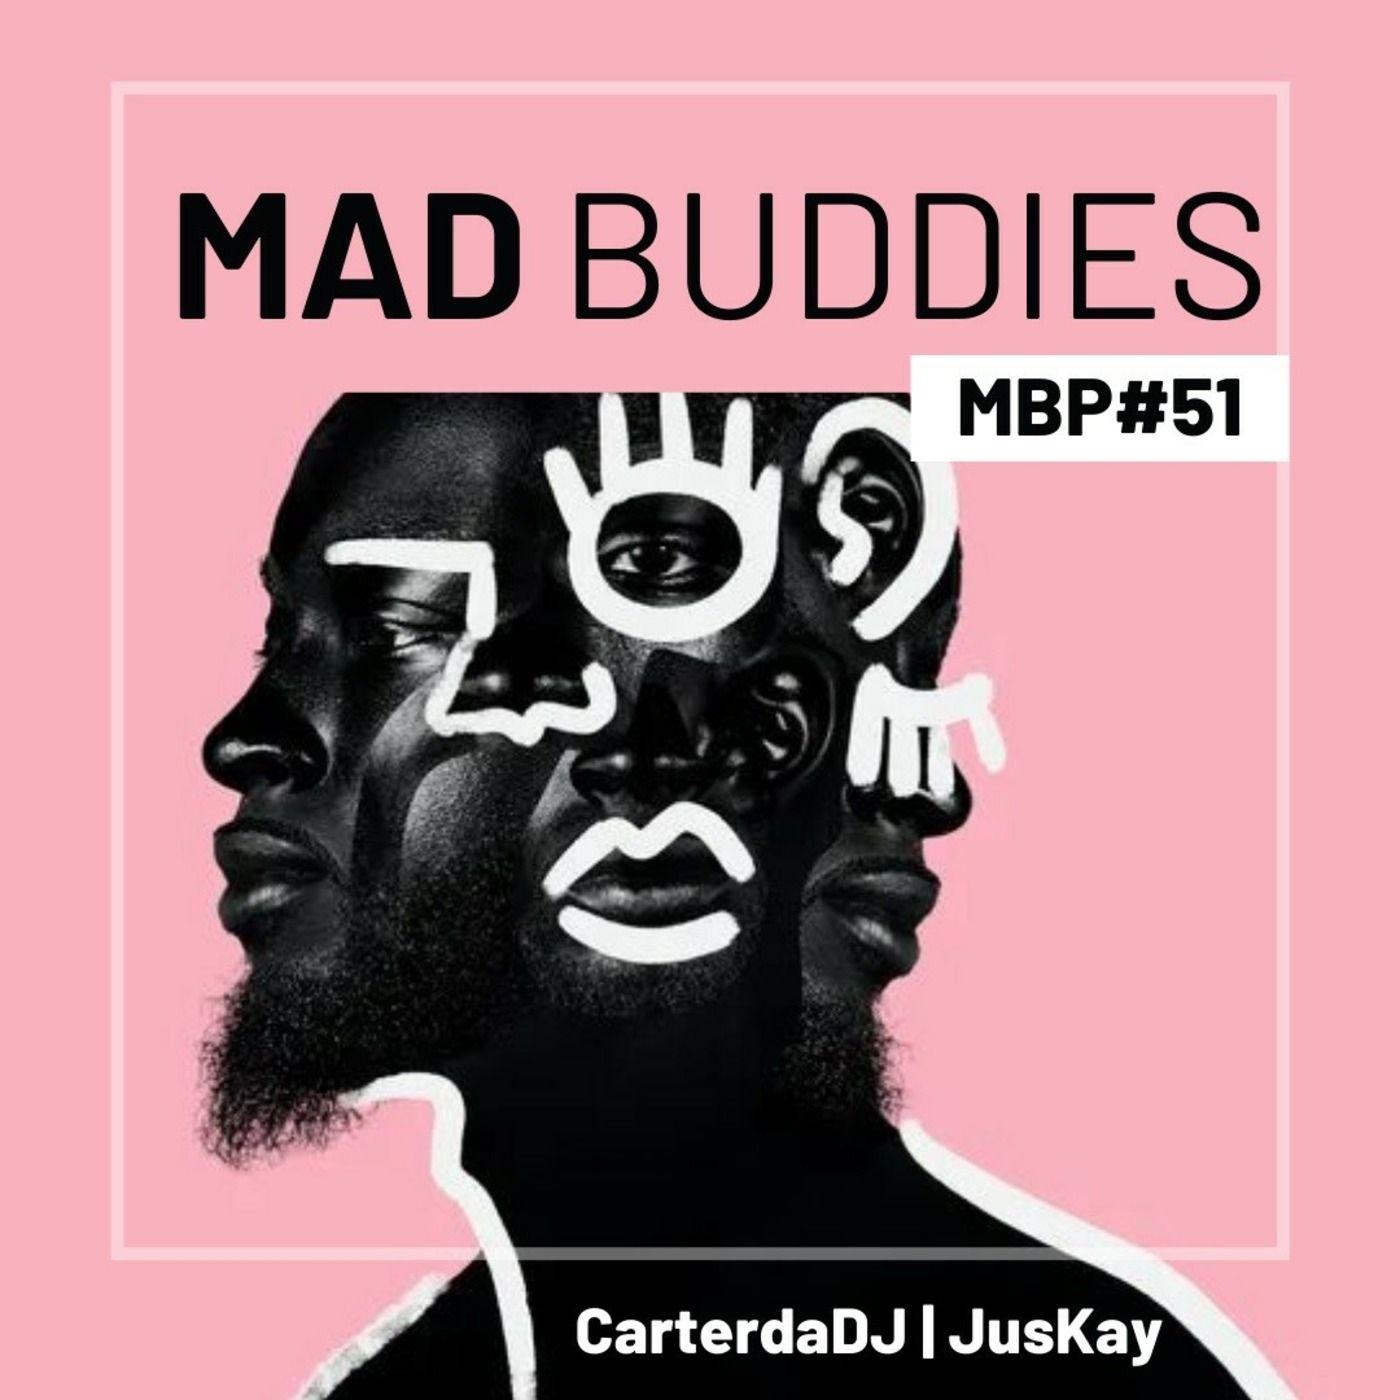 MBP #51 guest mix by JusKay